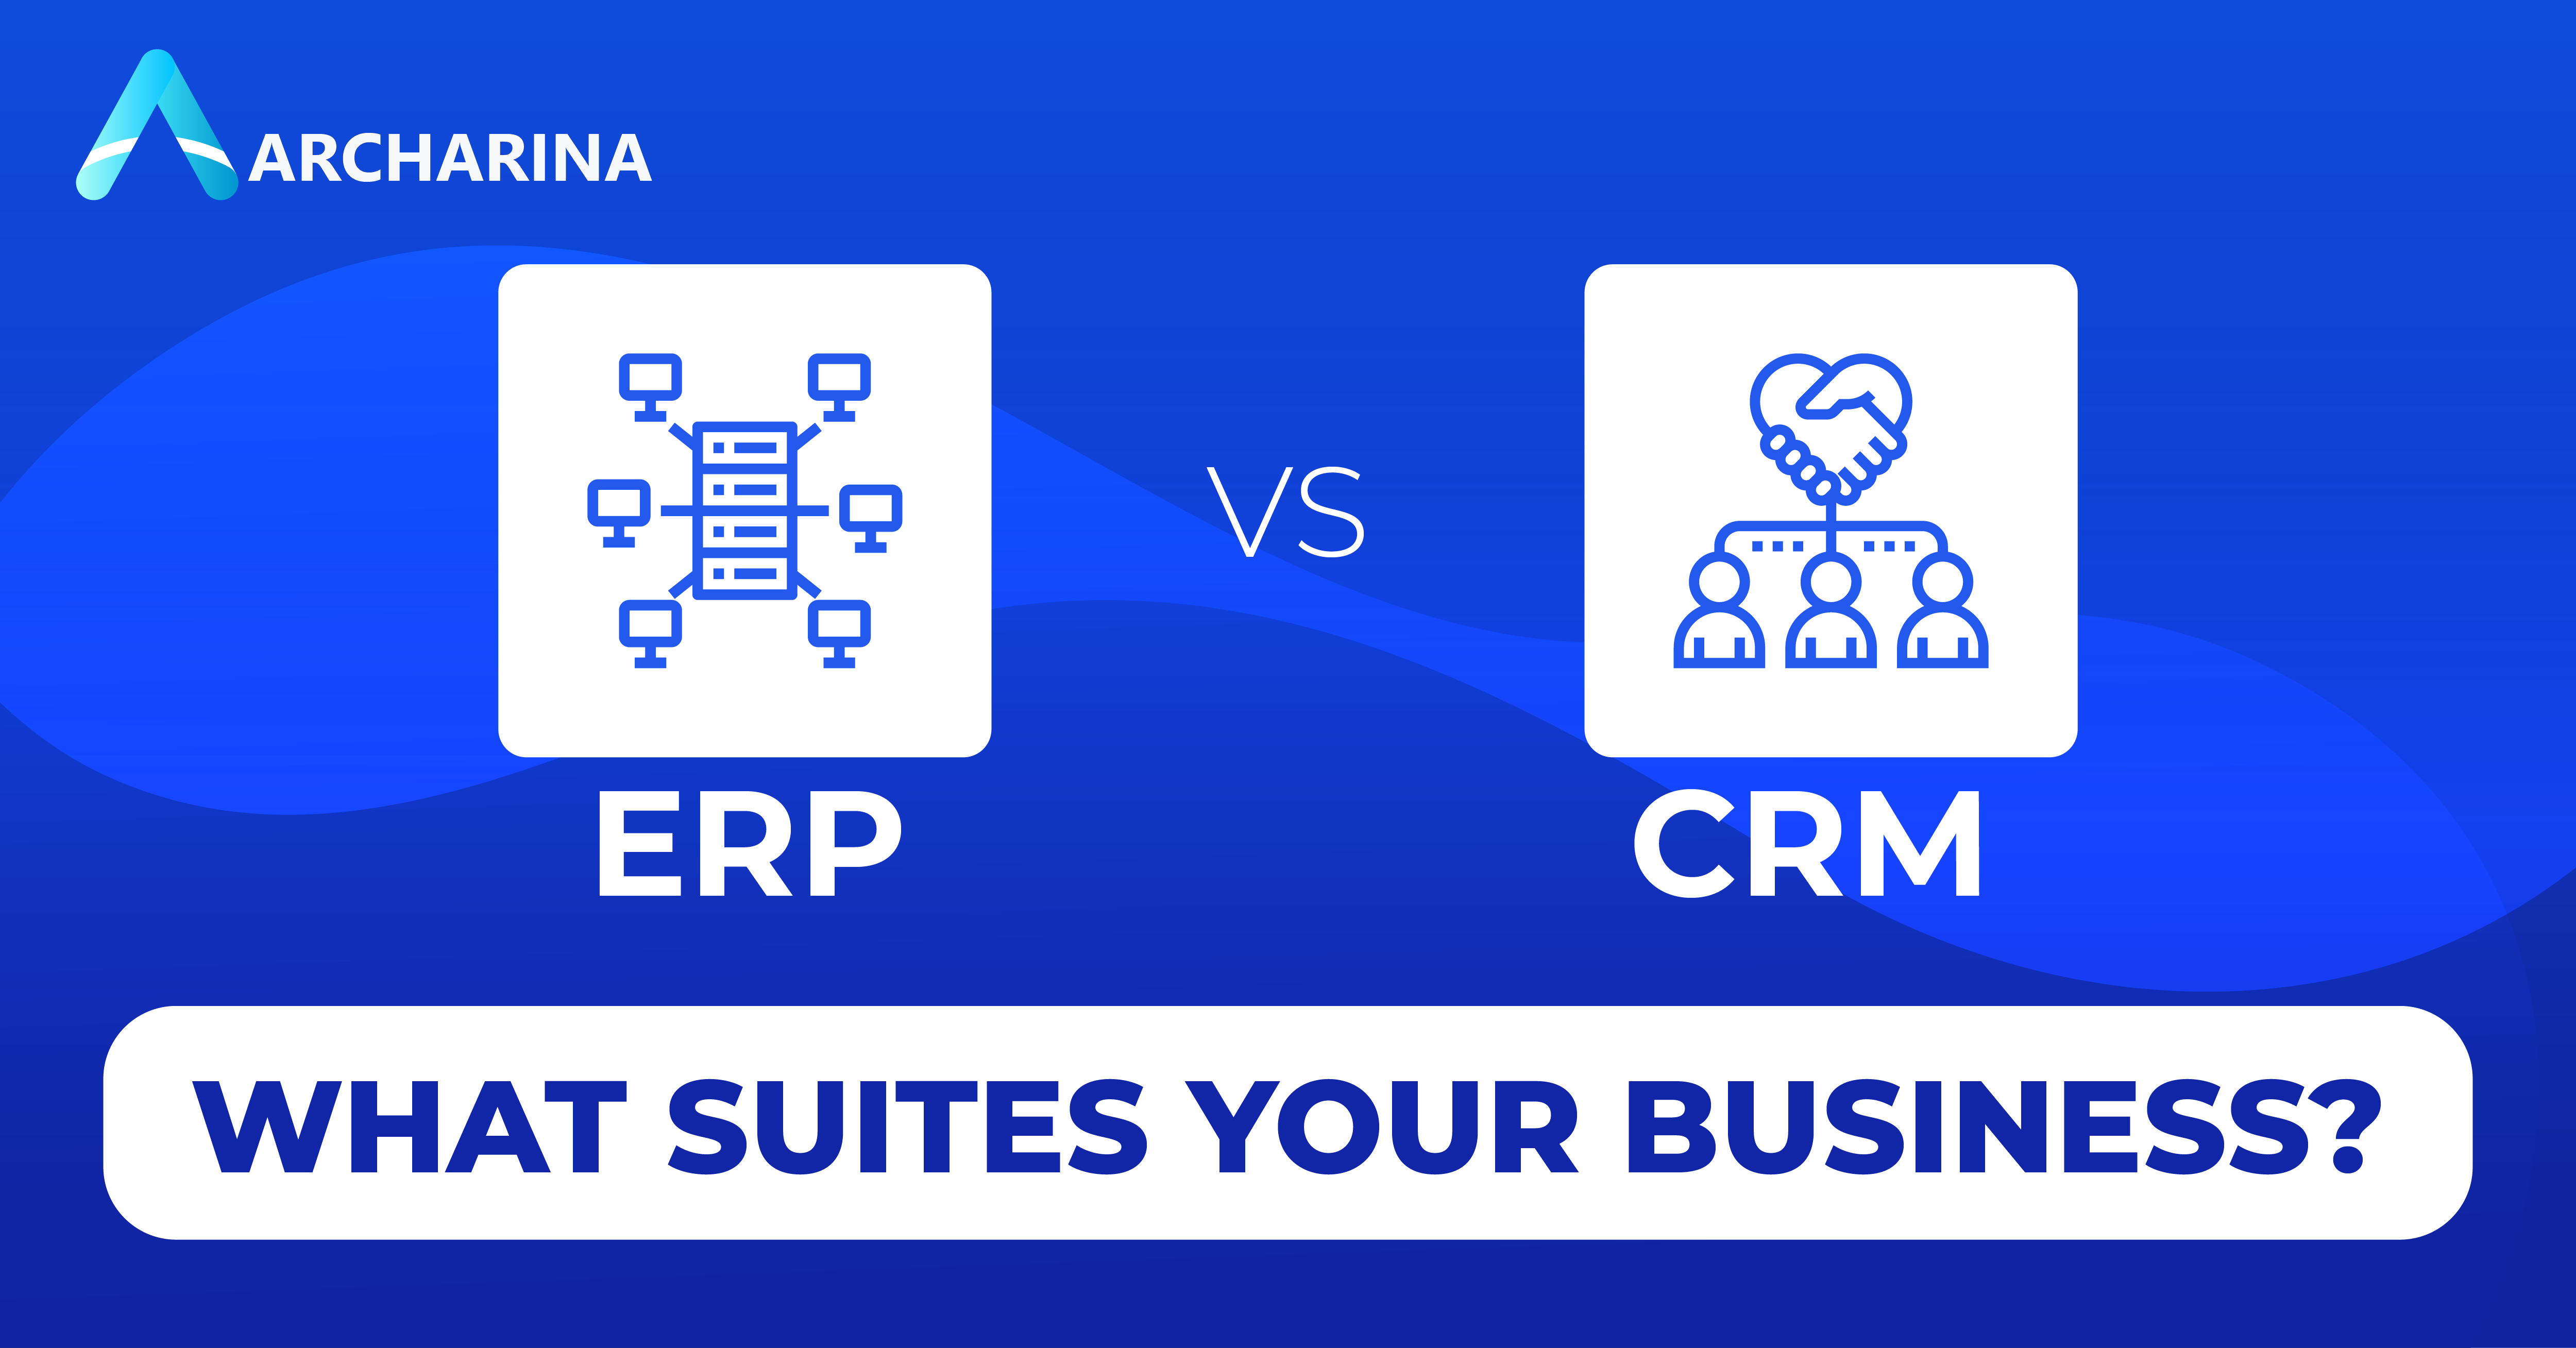 CRM vs ERP: What Suites Your Business? 